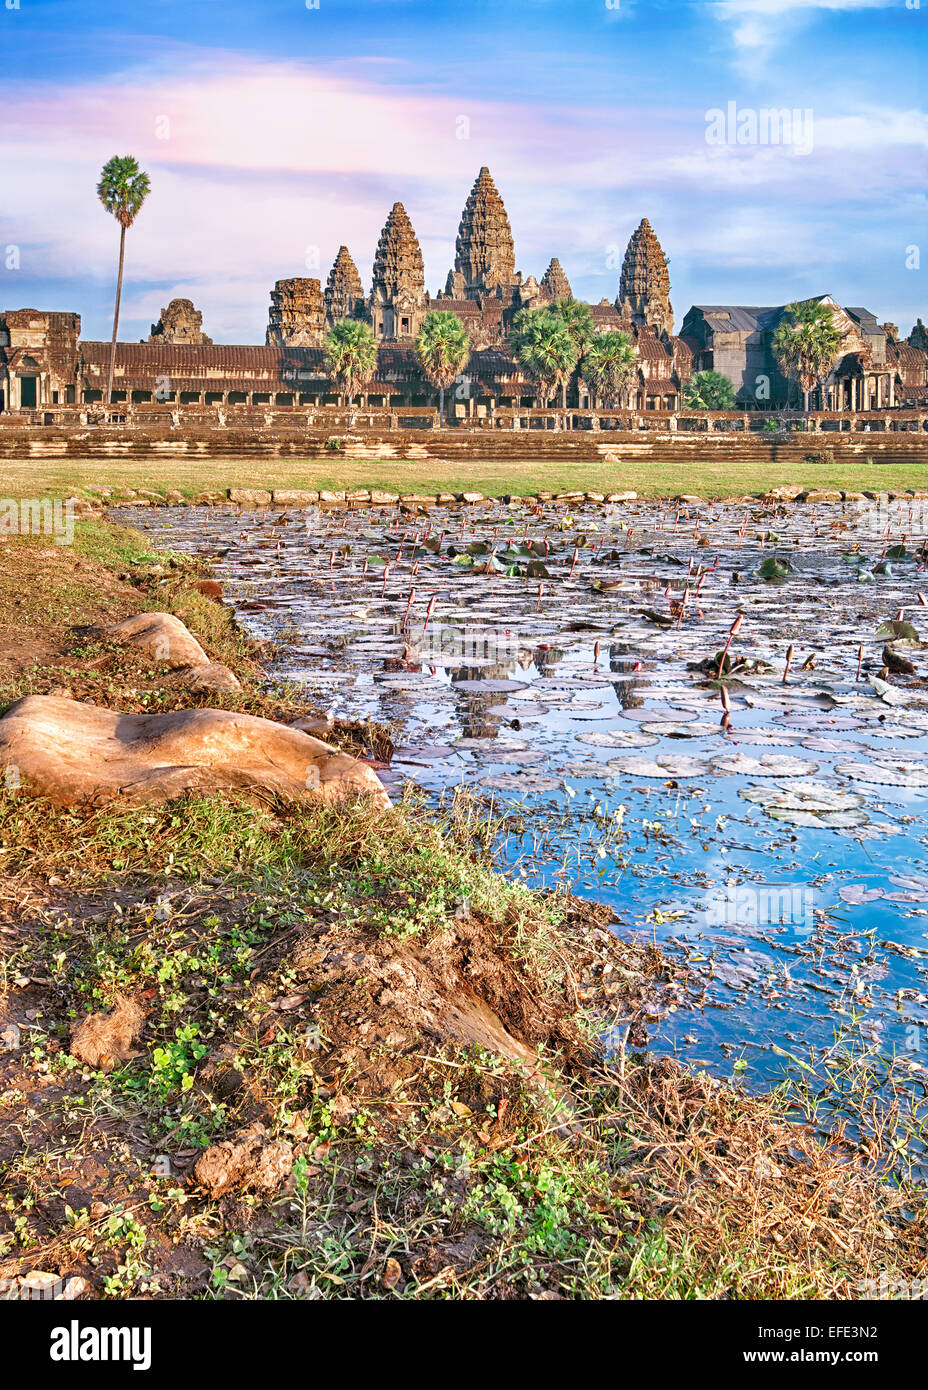 Angkor Wat temple reflecting in lake with flowers Stock Photo